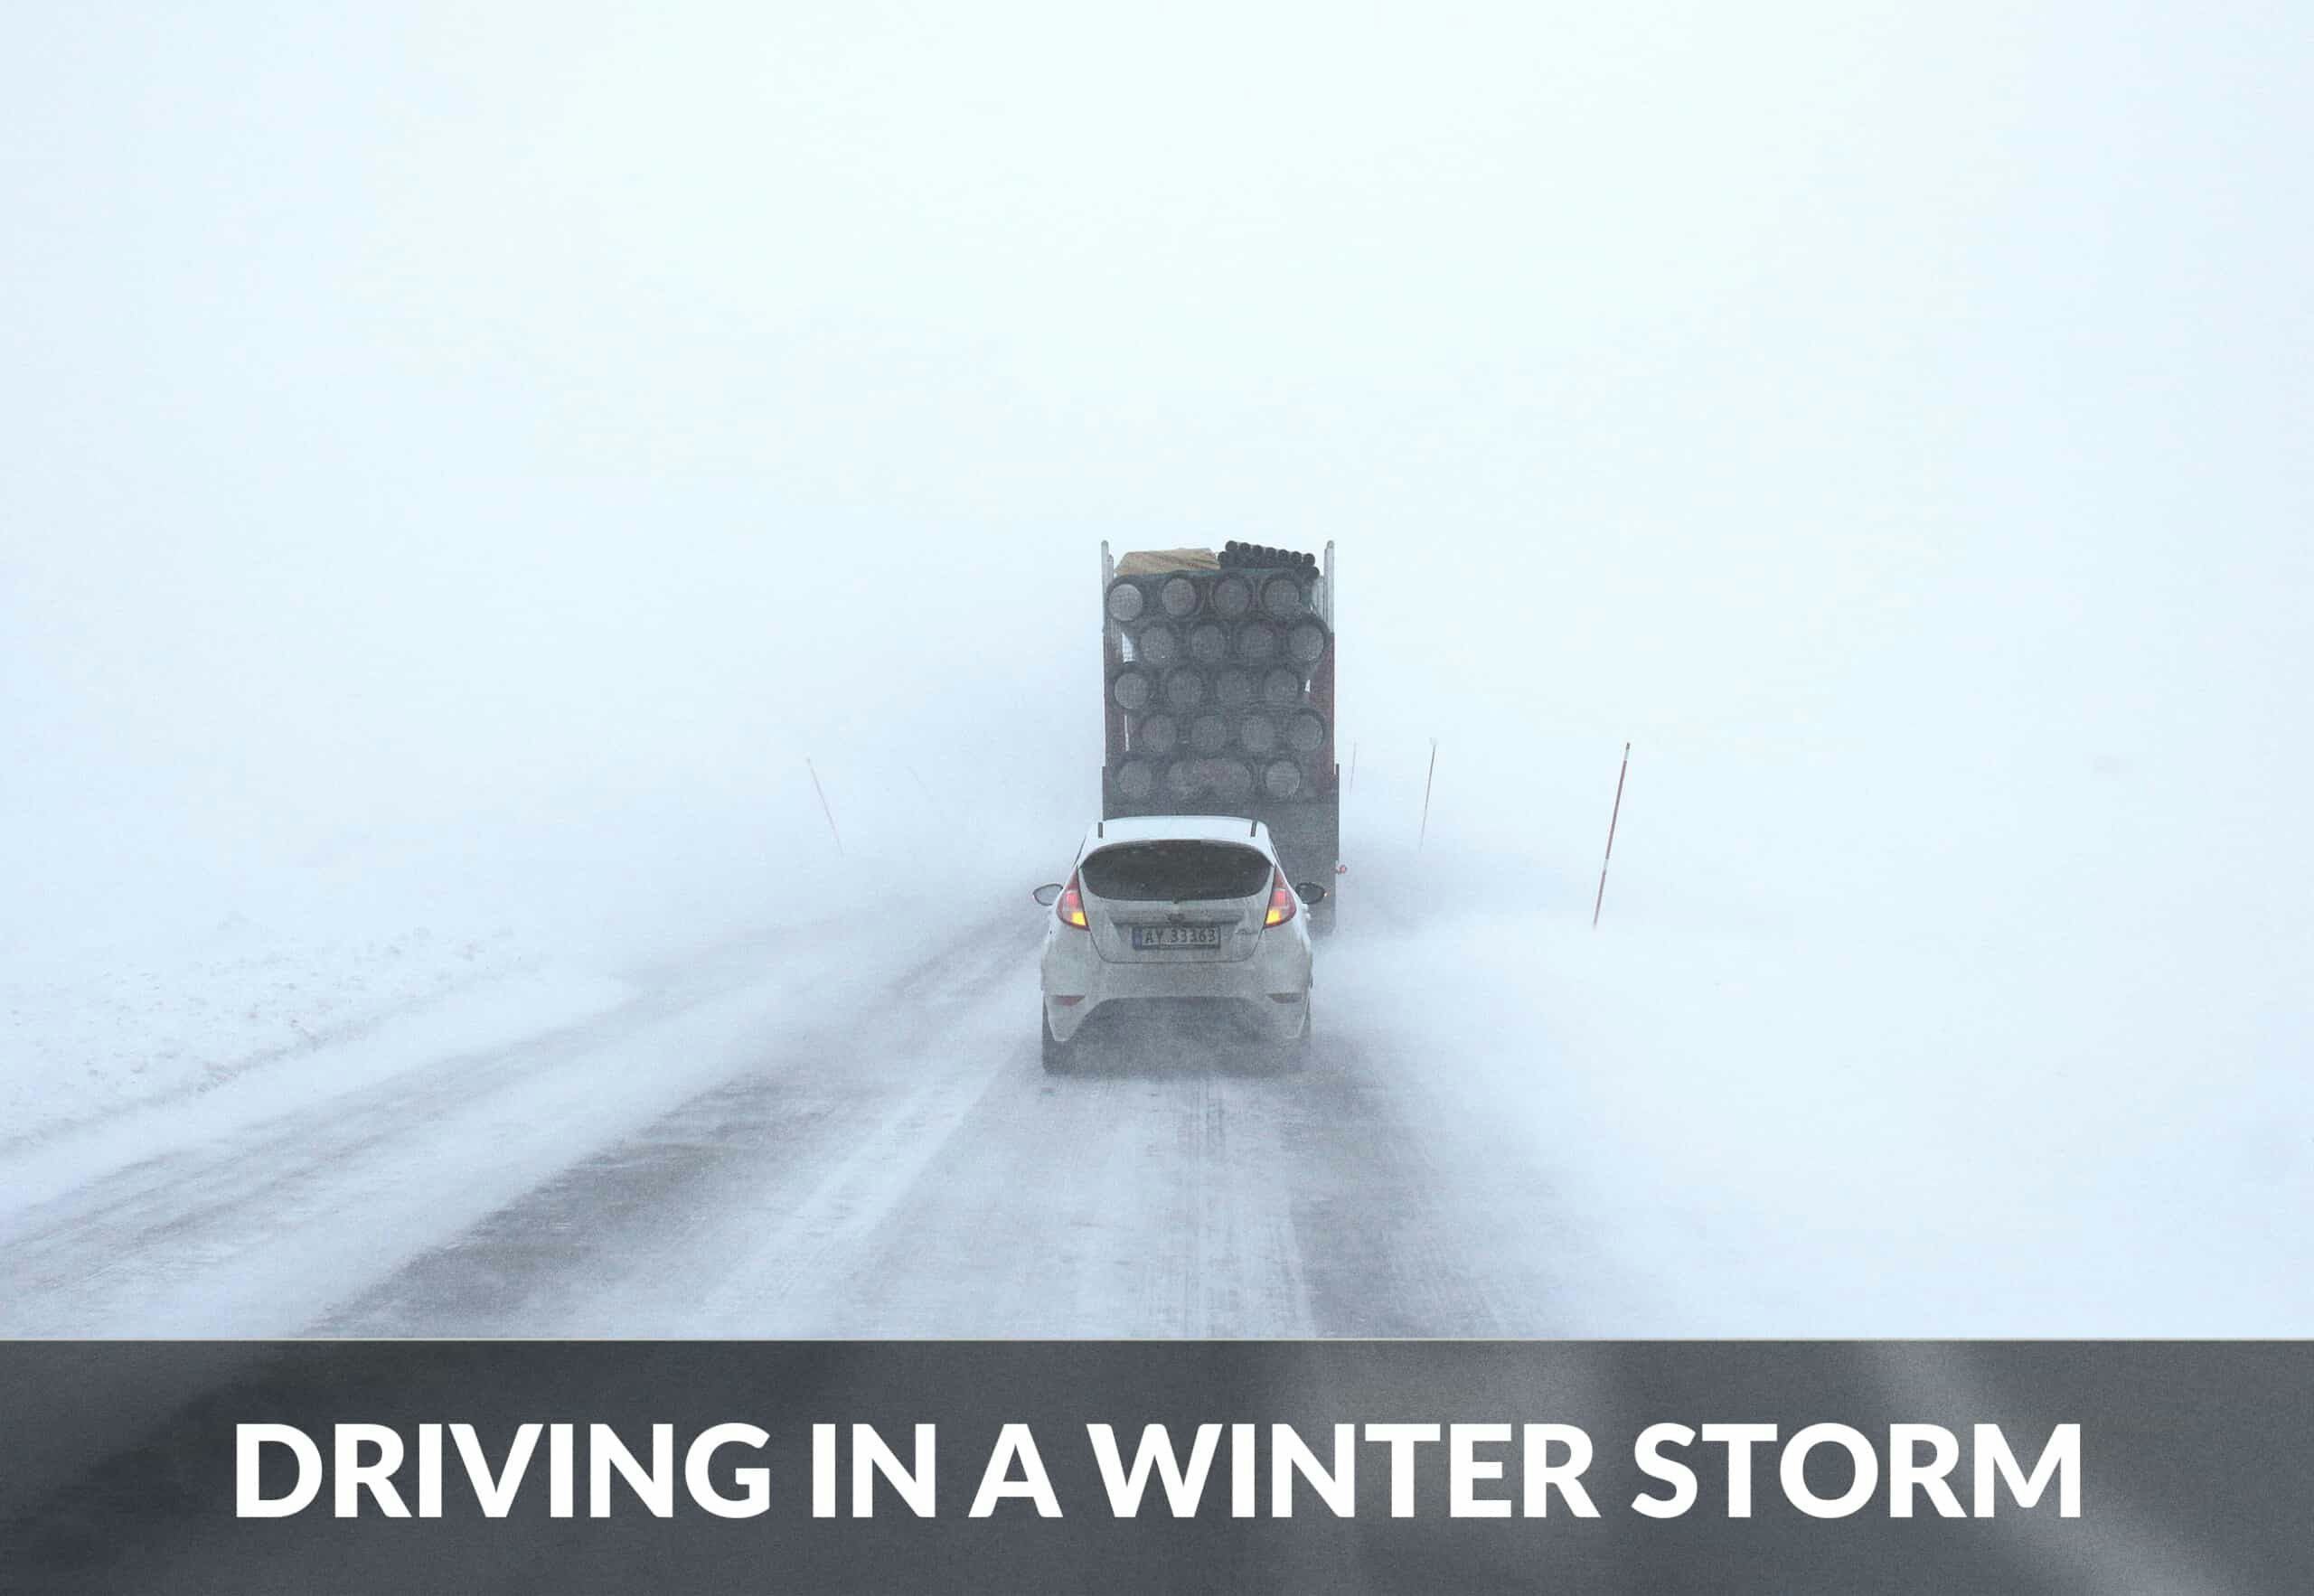 Driving during a winter storm